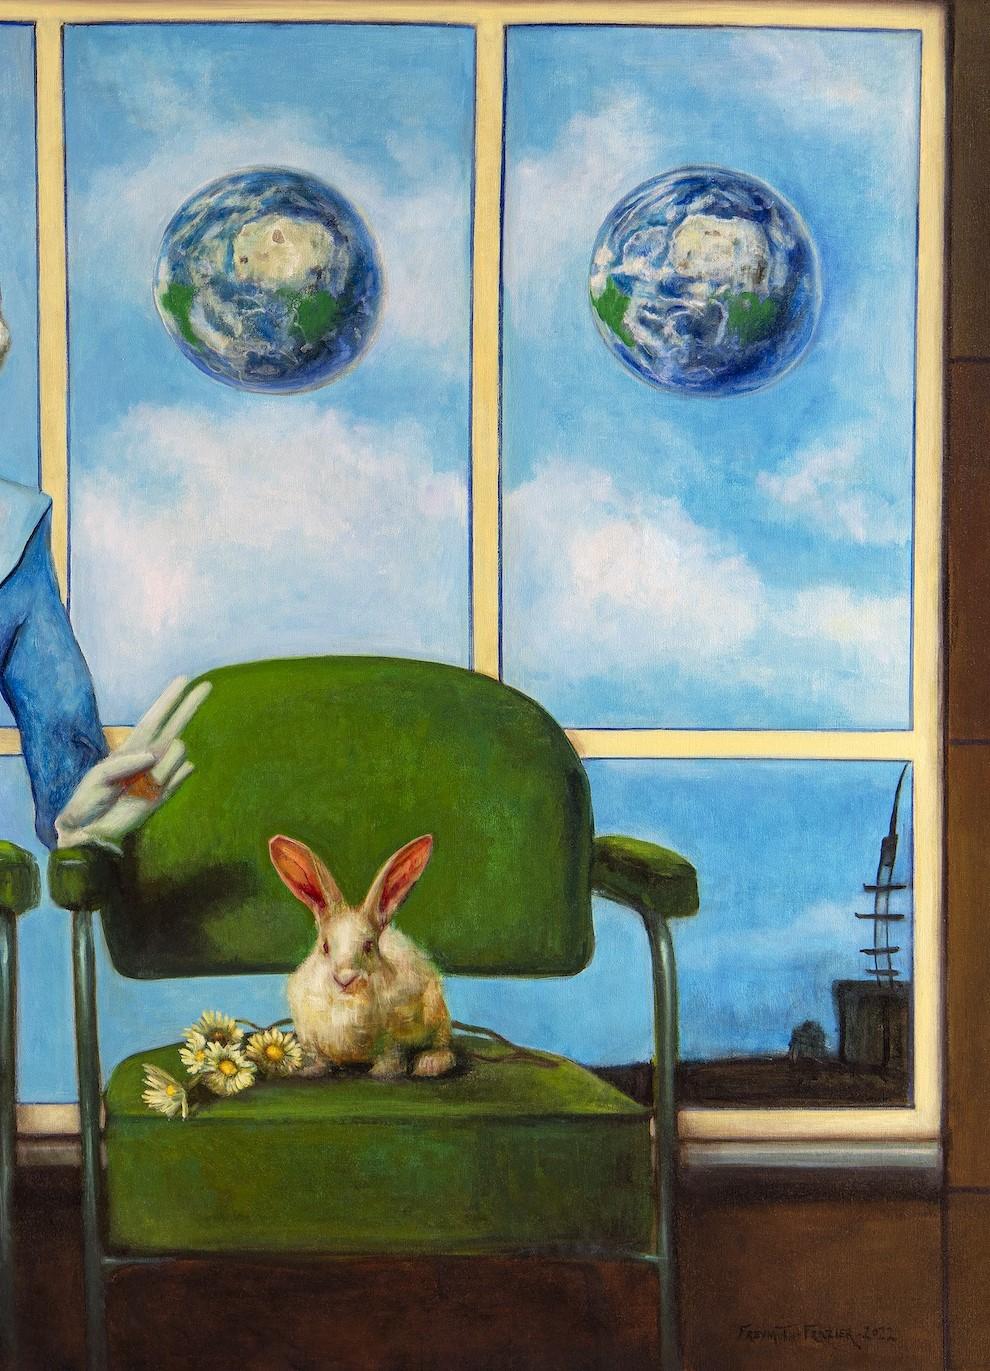 Come In Peace - Futuristic Woman in Space Suit Seated Next to a Bunny - Contemporary Painting by Rose Freymuth-Frazier